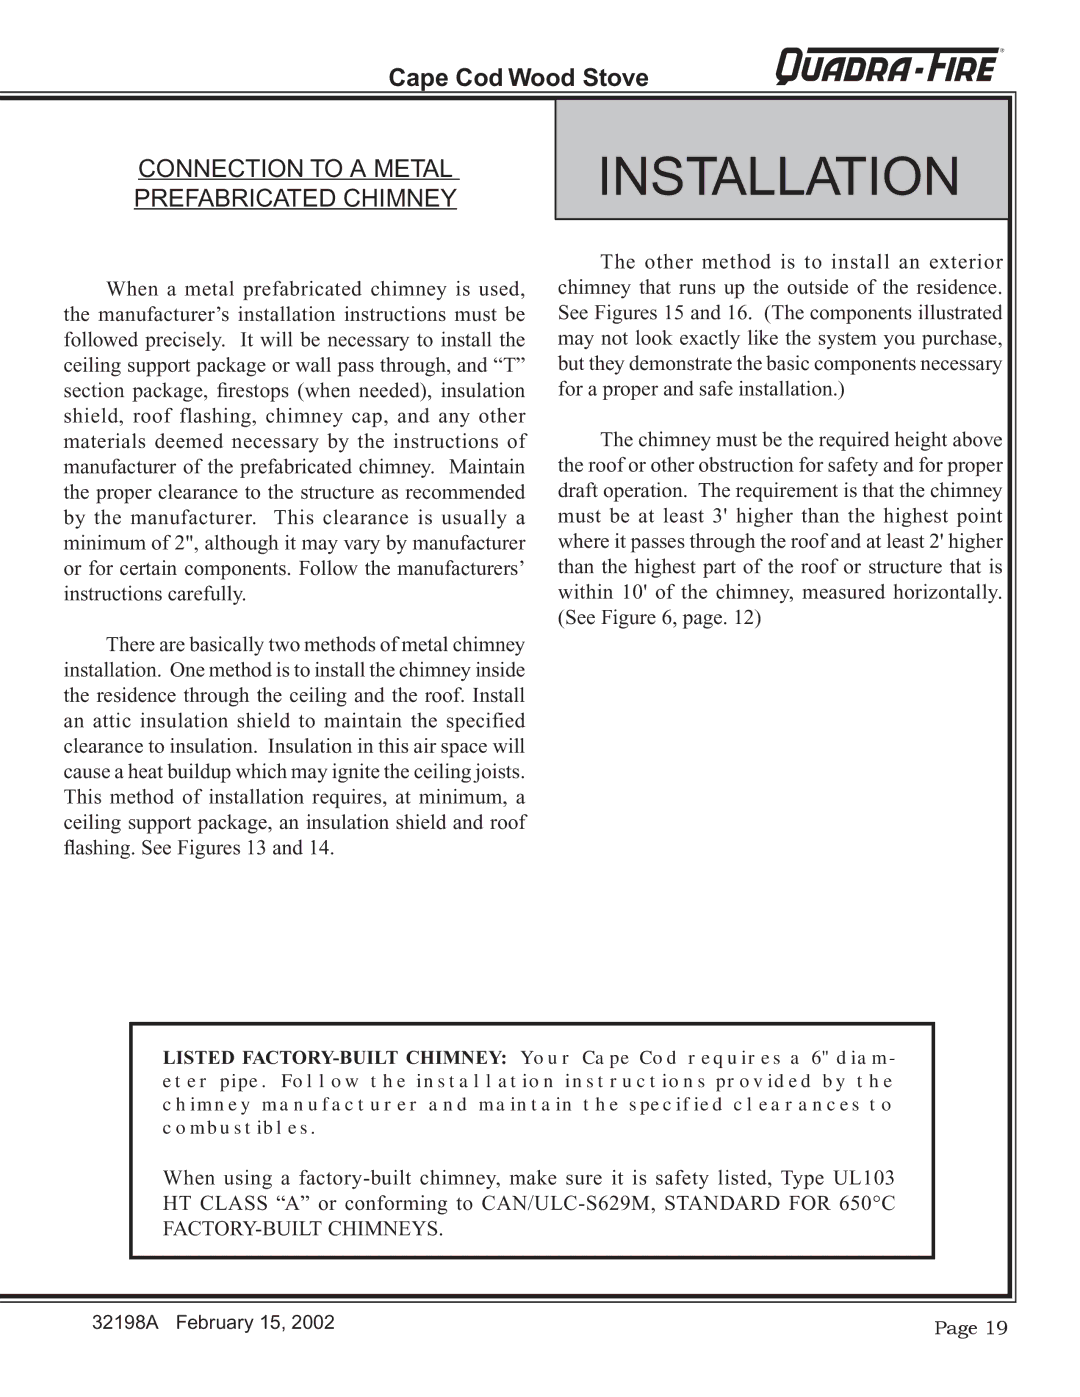 Quadra-Fire 32198A installation instructions Connection to a Metal Prefabricated Chimney 